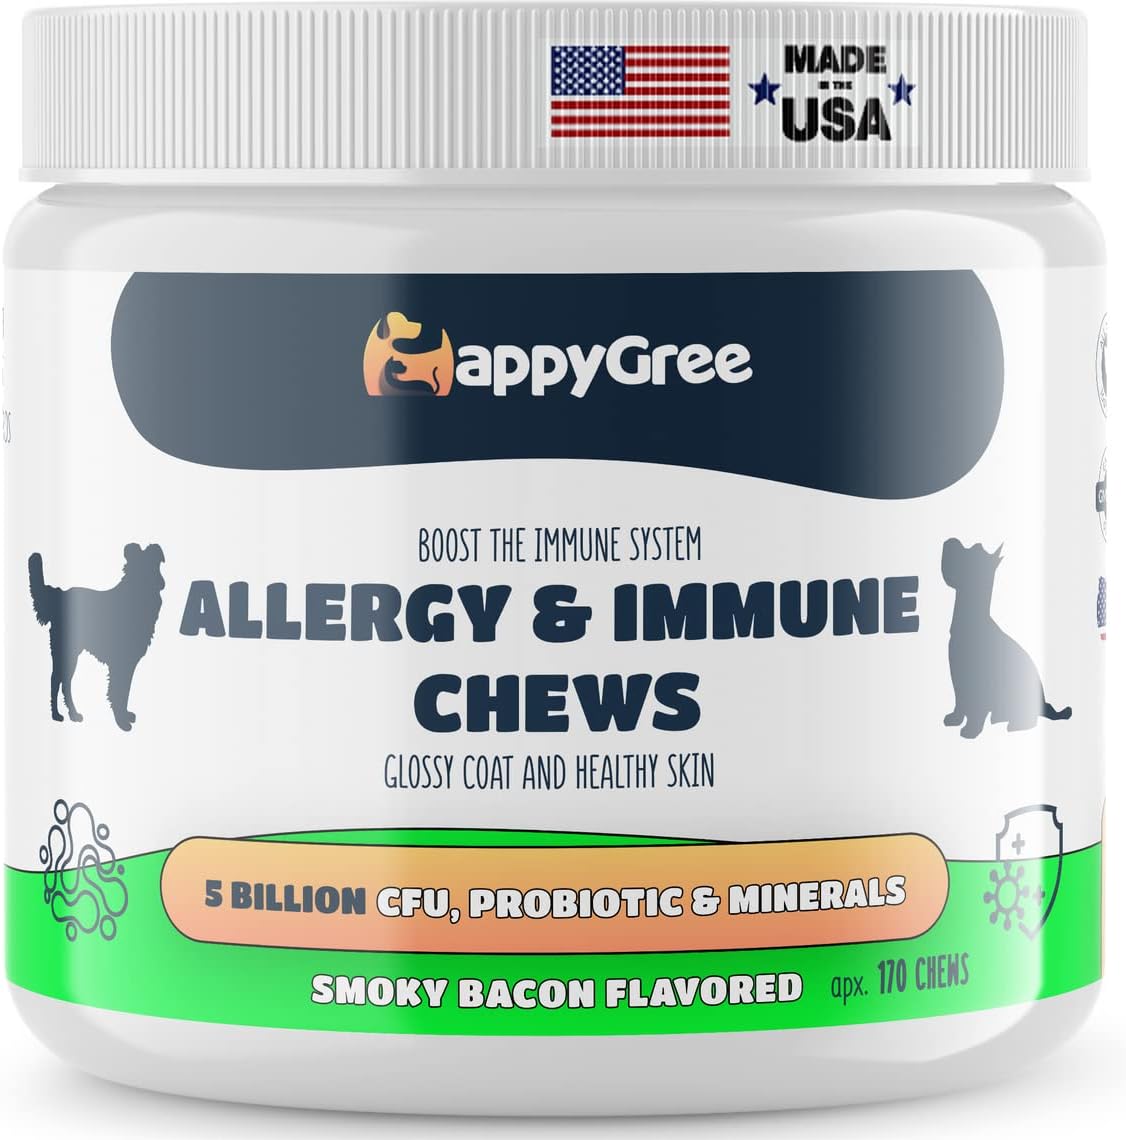 Best Natural Health Supplements for Dogs, Various Formulas & Benefits - Vet Recommended, 170 Natural Soft Chews - Smoky Bacon Flavor, Made in The USA (Allergy Immune Support)